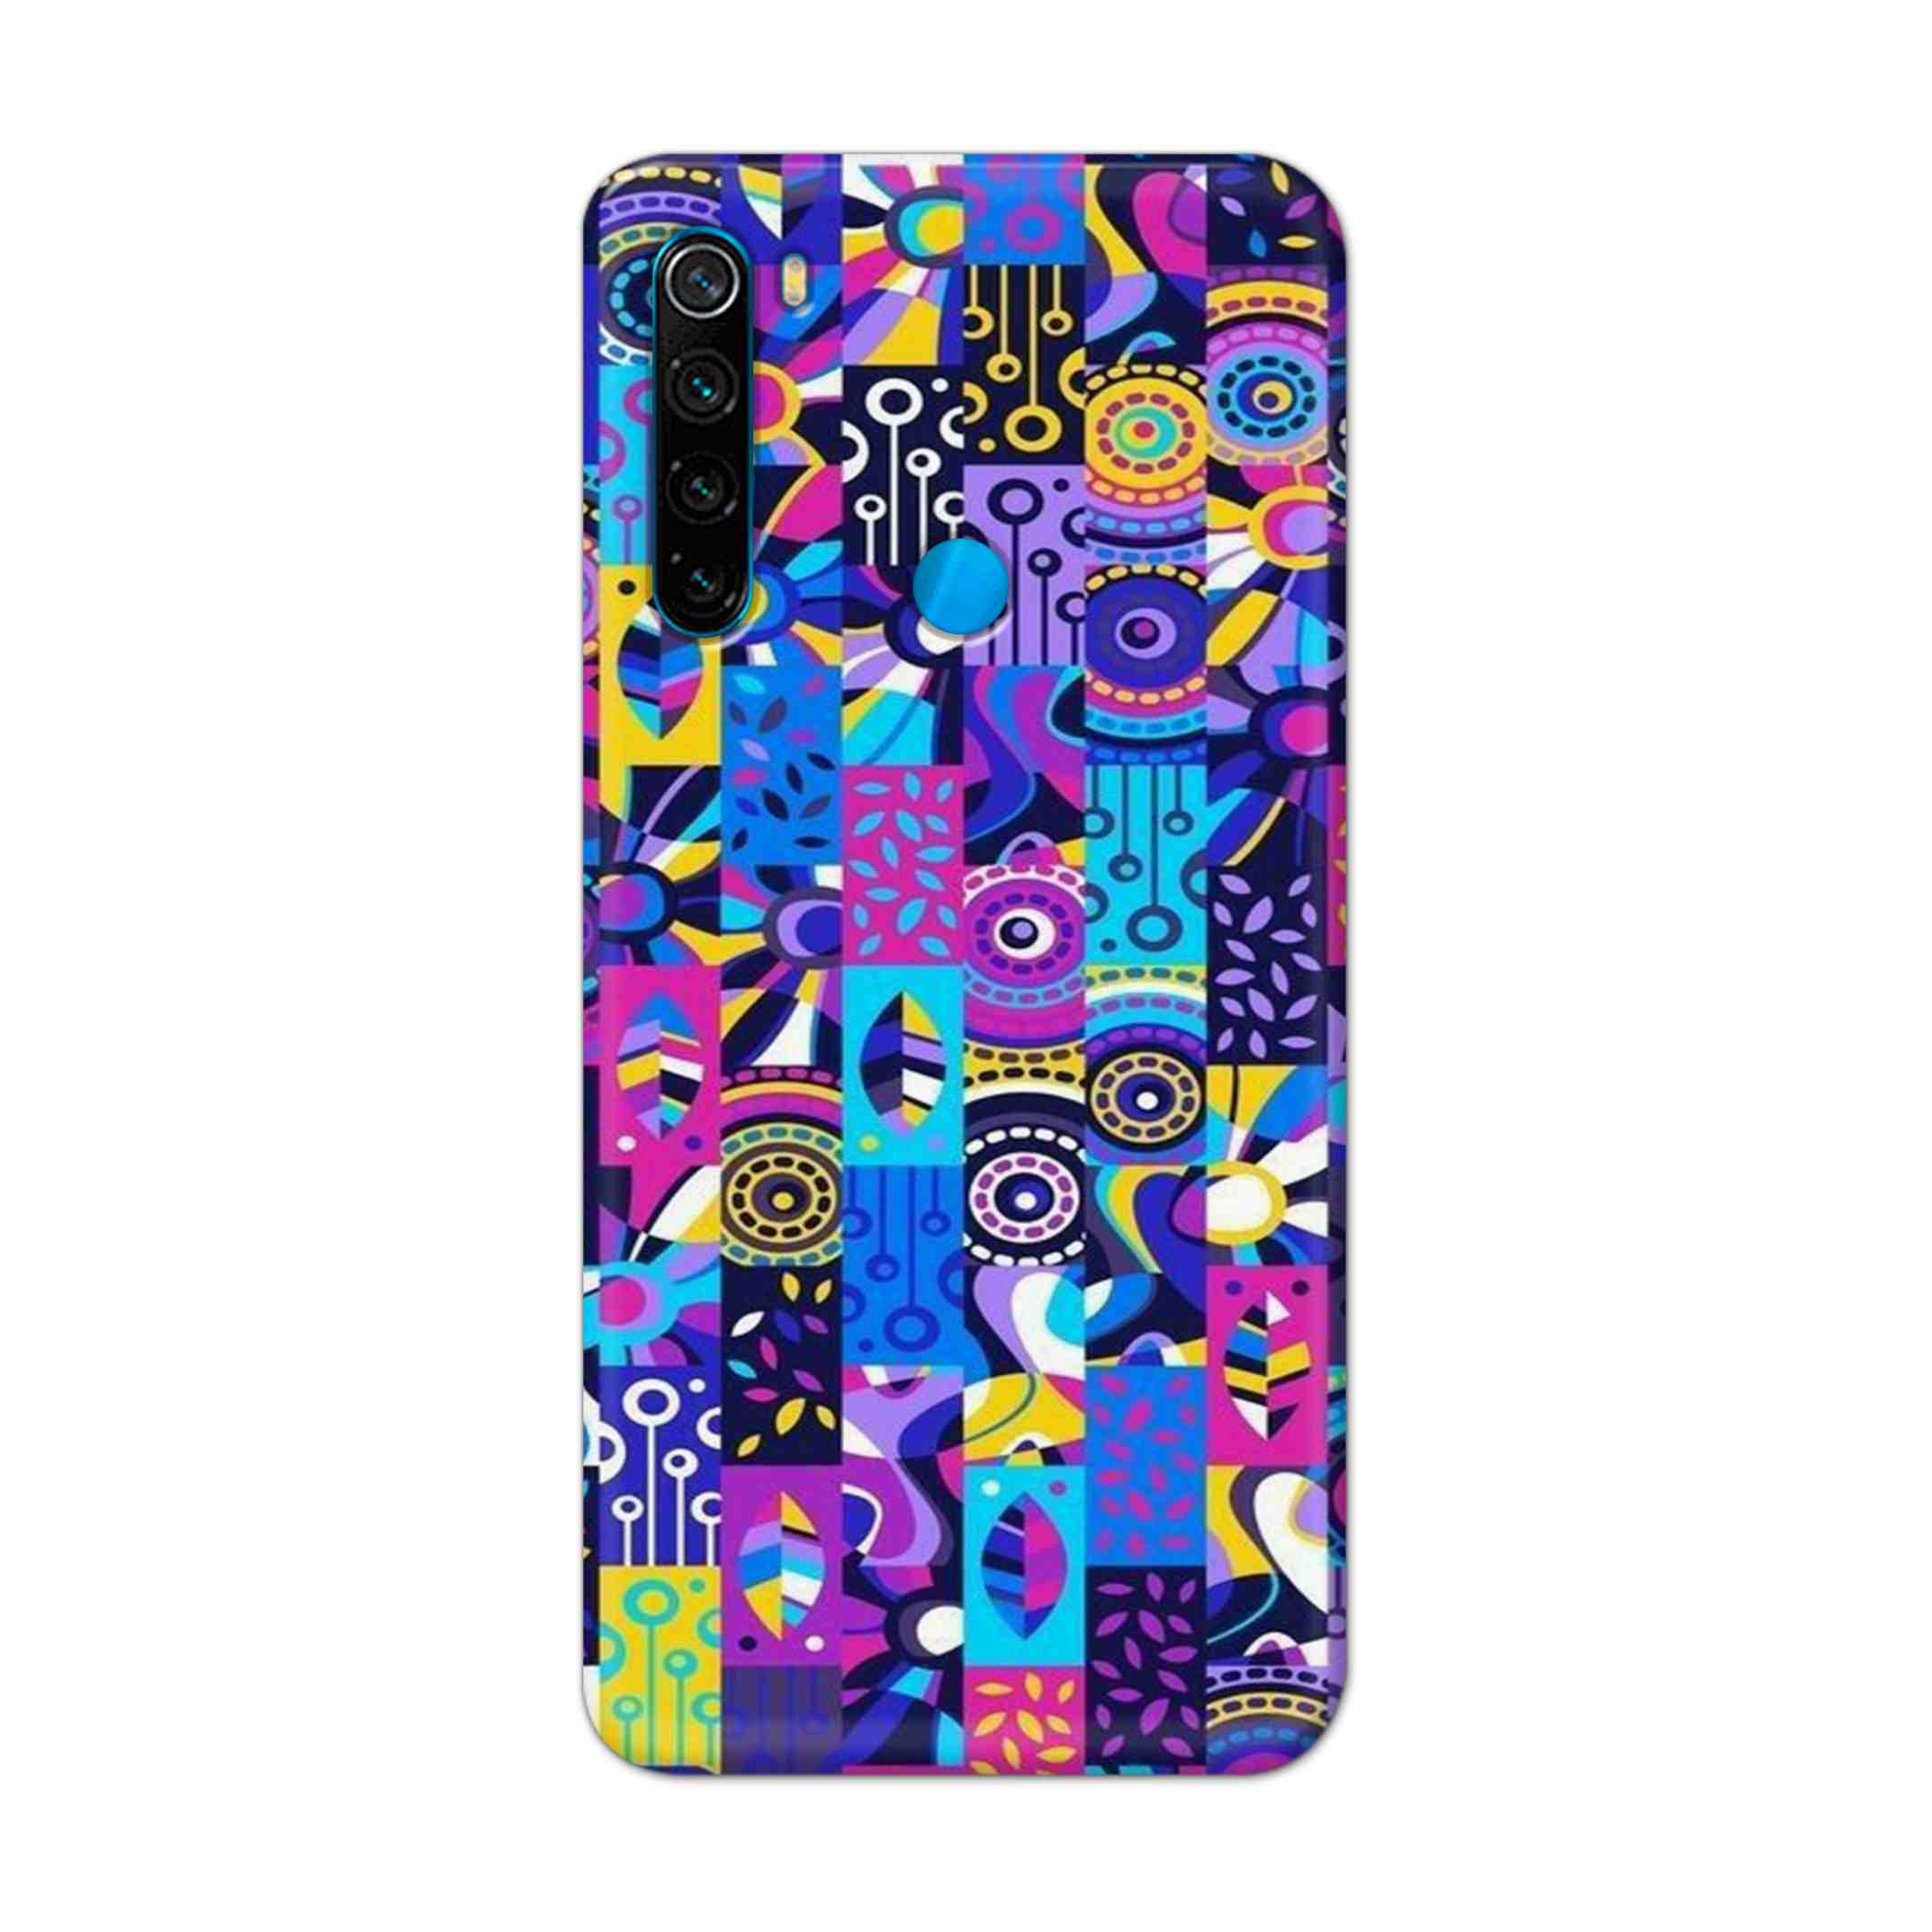 Buy Rainbow Art Hard Back Mobile Phone Case Cover For Xiaomi Redmi Note 8 Online